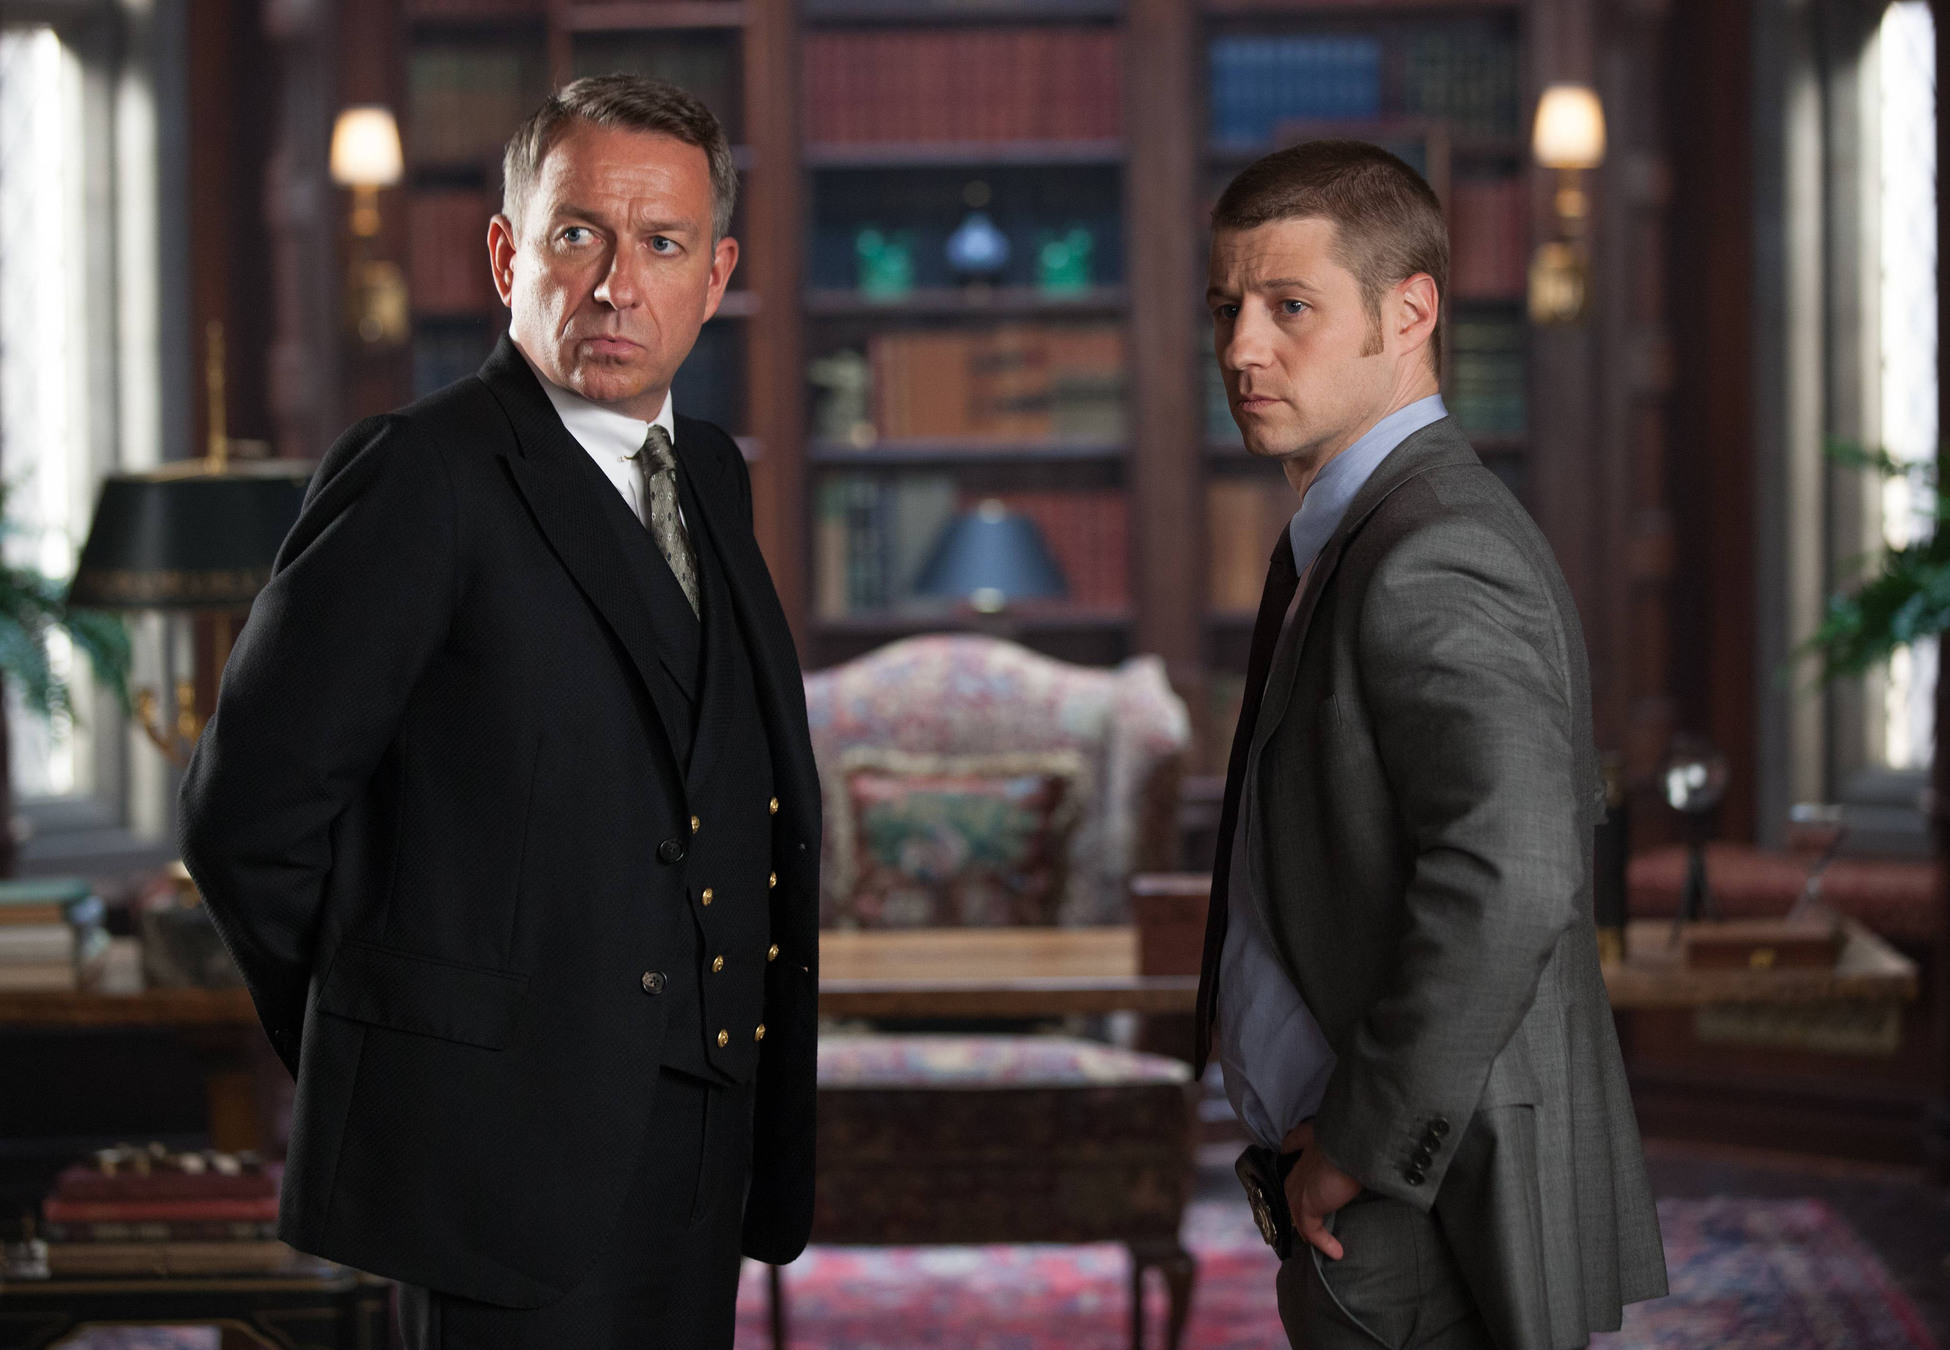 GOTHAM: Alfred (Sean Pertwee, L) discusses Bruce's well-being with Detective Gordon (Ben McKenzie, R) in the "Selina Kyle" episode of GOTHAM airing Monday, Sept. 29 (8:00-9:00 PM ET/PT) on FOX. Â©2014 Fox Broadcasting Co. Cr: Jessica Miglio/FOX